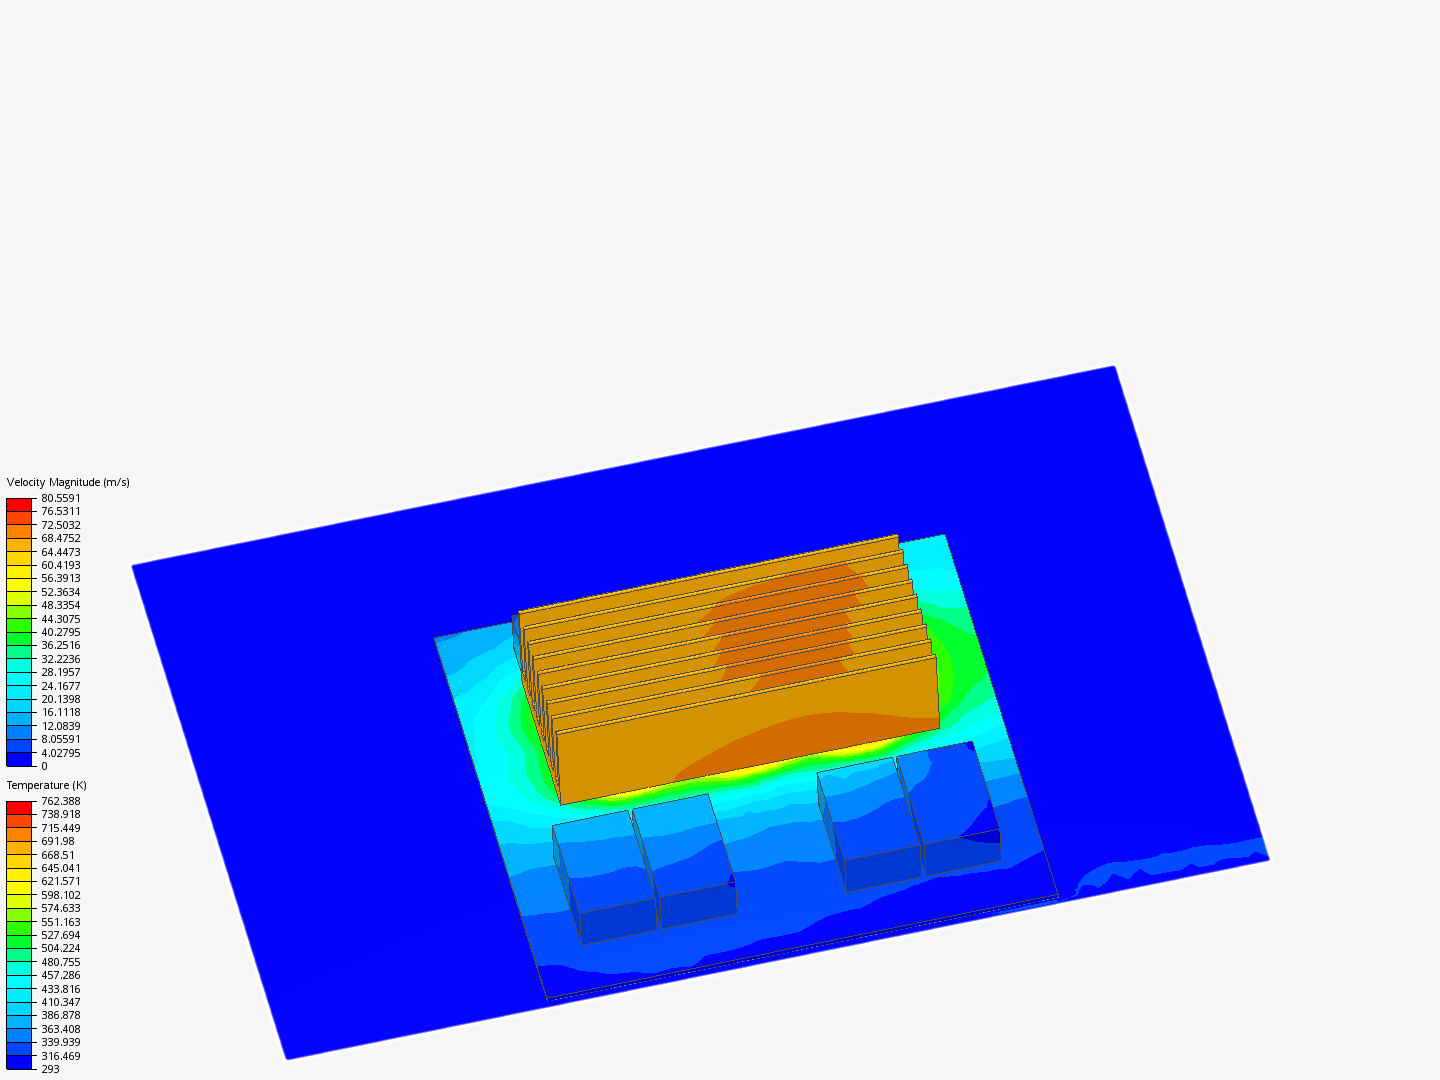 Thermal analysis of the inverter image